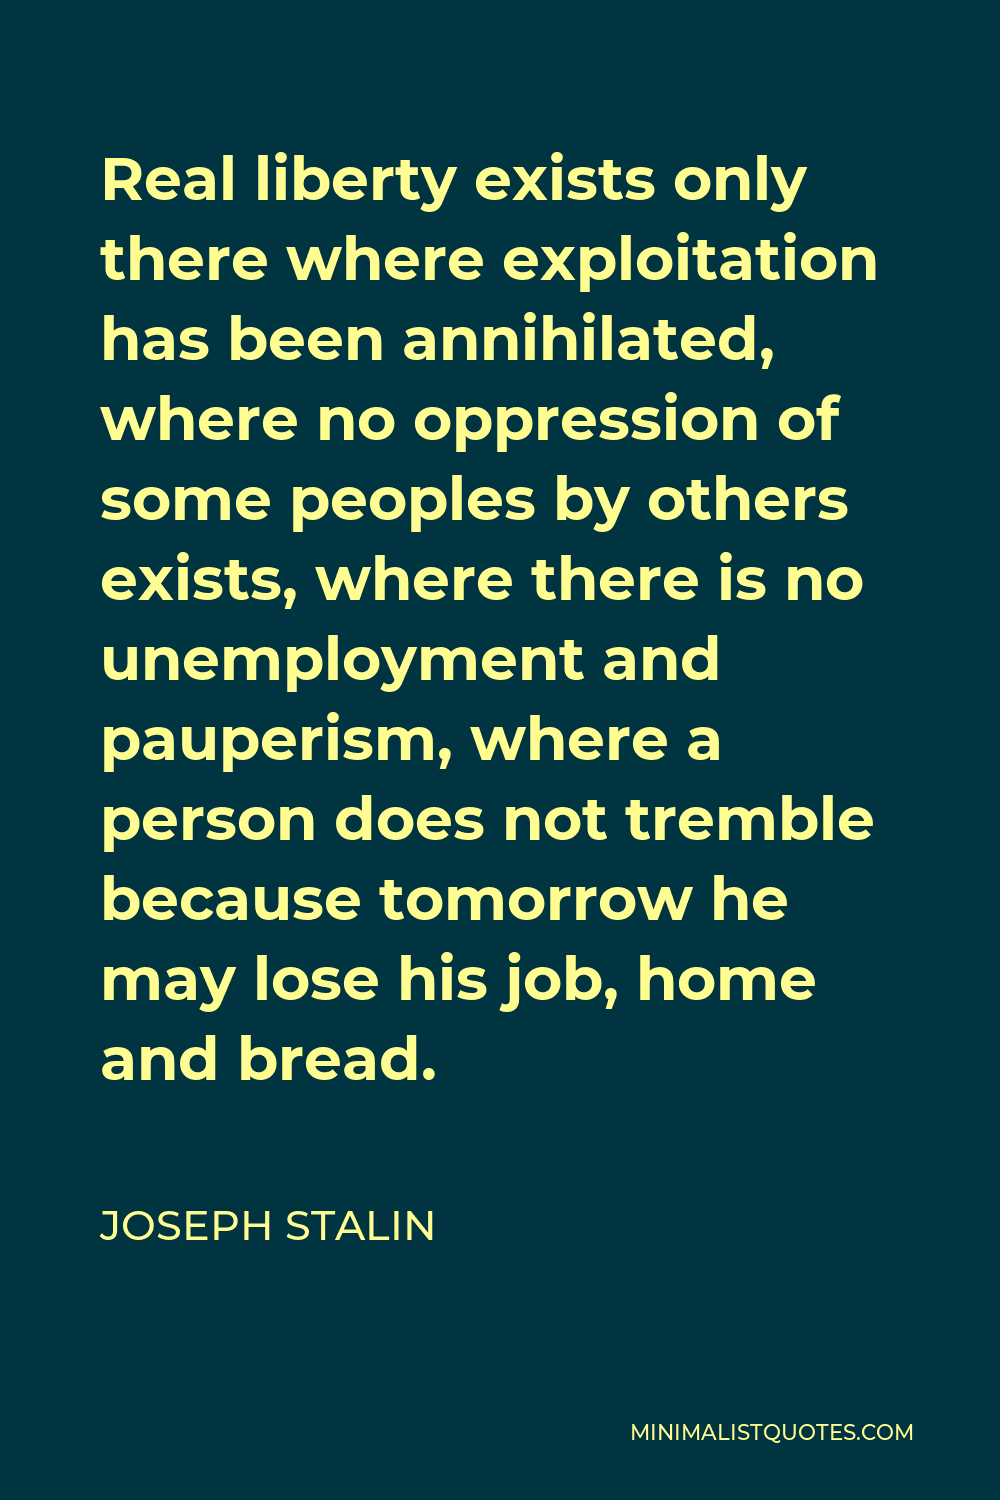 Joseph Stalin Quote - Real liberty exists only there where exploitation has been annihilated, where no oppression of some peoples by others exists, where there is no unemployment and pauperism, where a person does not tremble because tomorrow he may lose his job, home and bread.